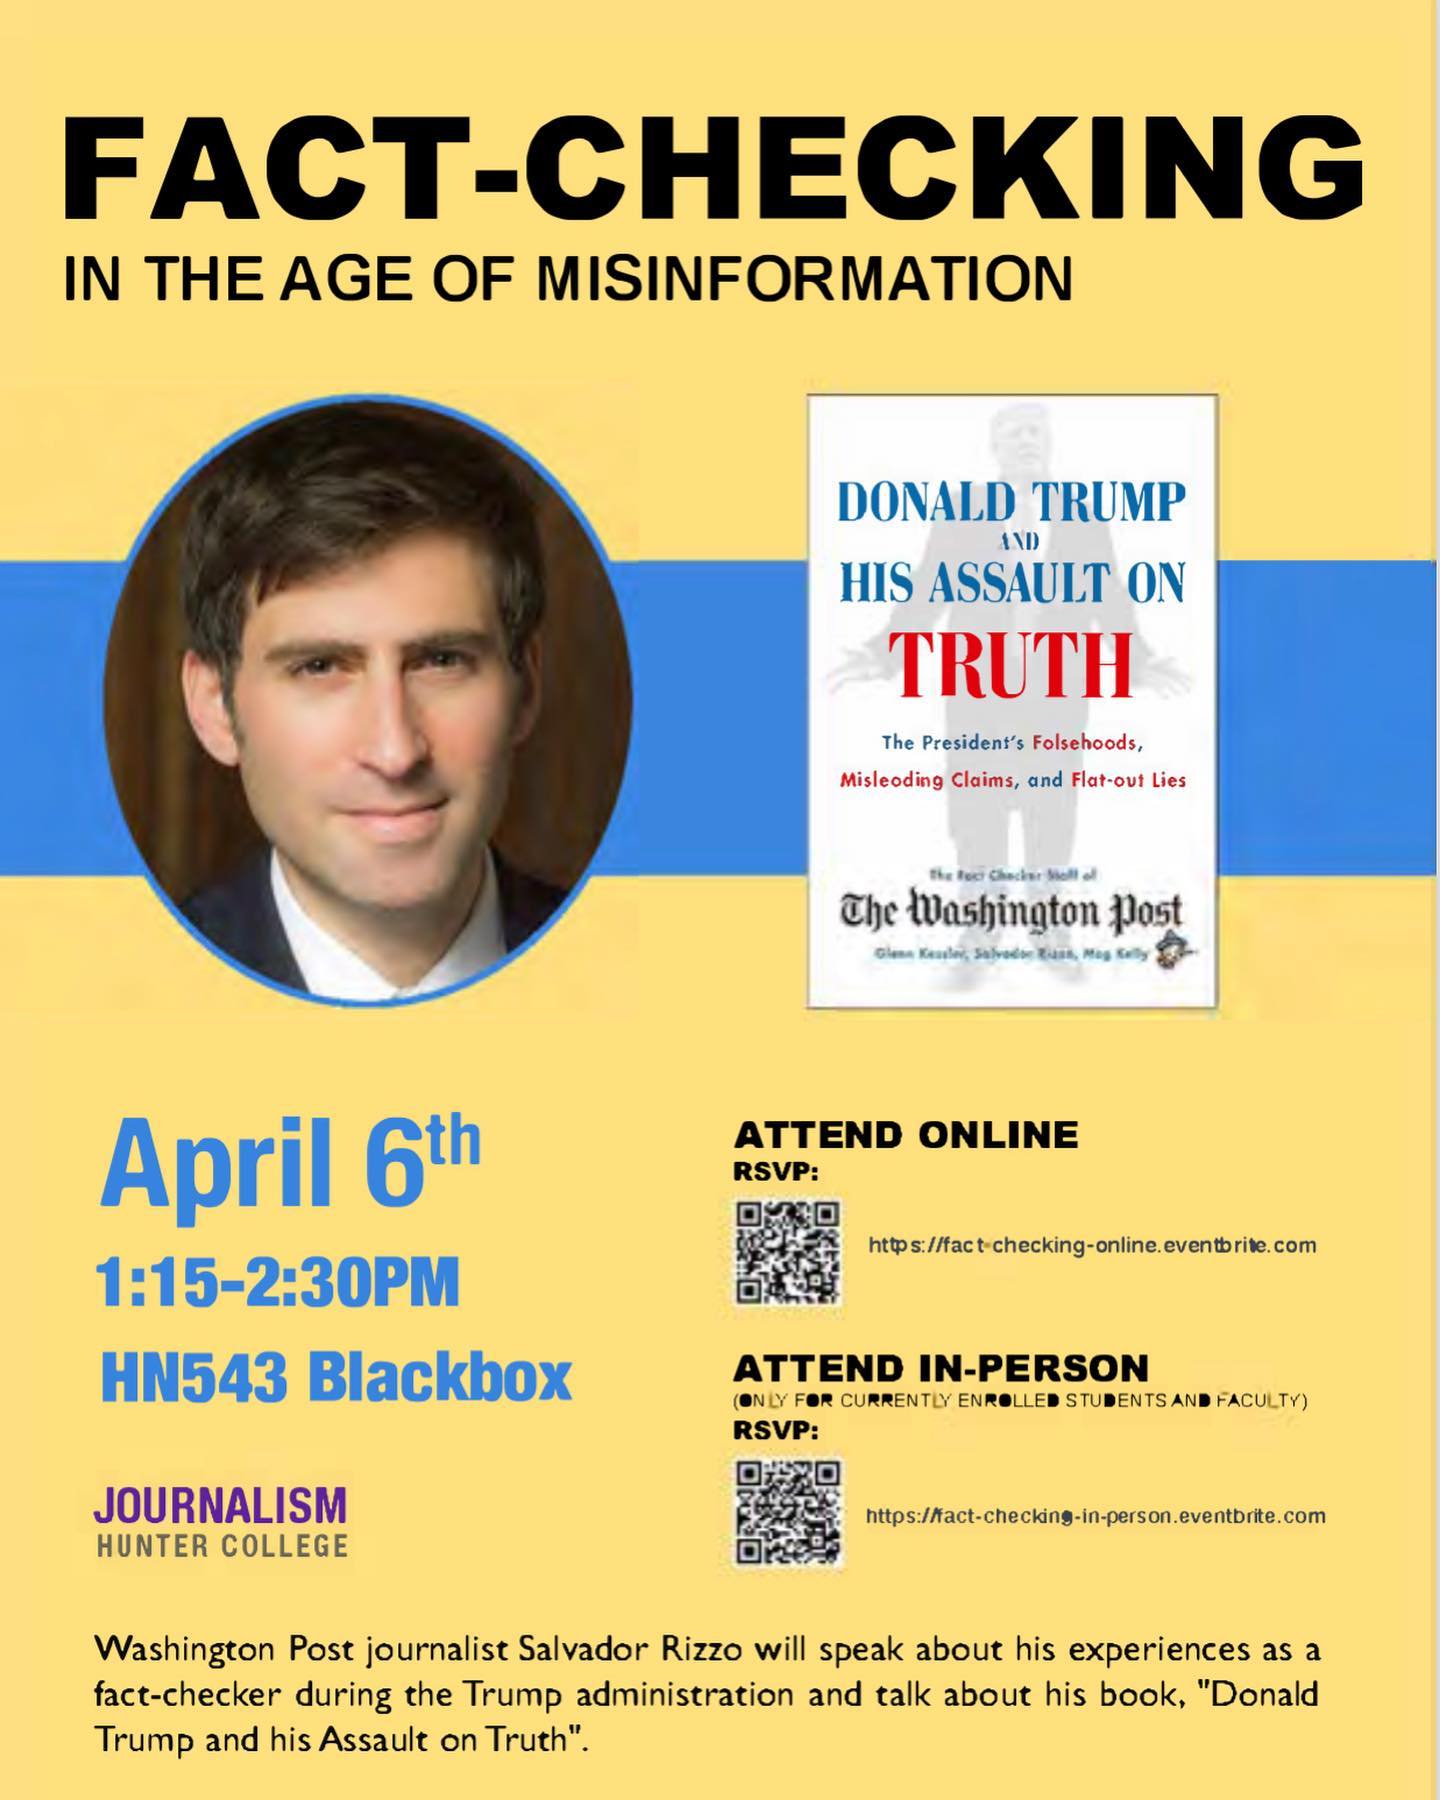 Join us for a conversation with Sal Rizzo, fact-checker for @washingtonpost, on April 6th to talk about the spread of misinformation and his book, “Donald Trump and His Assault on Truth.”

Visit https://www.eventbrite.com/e/289748153527 to register.